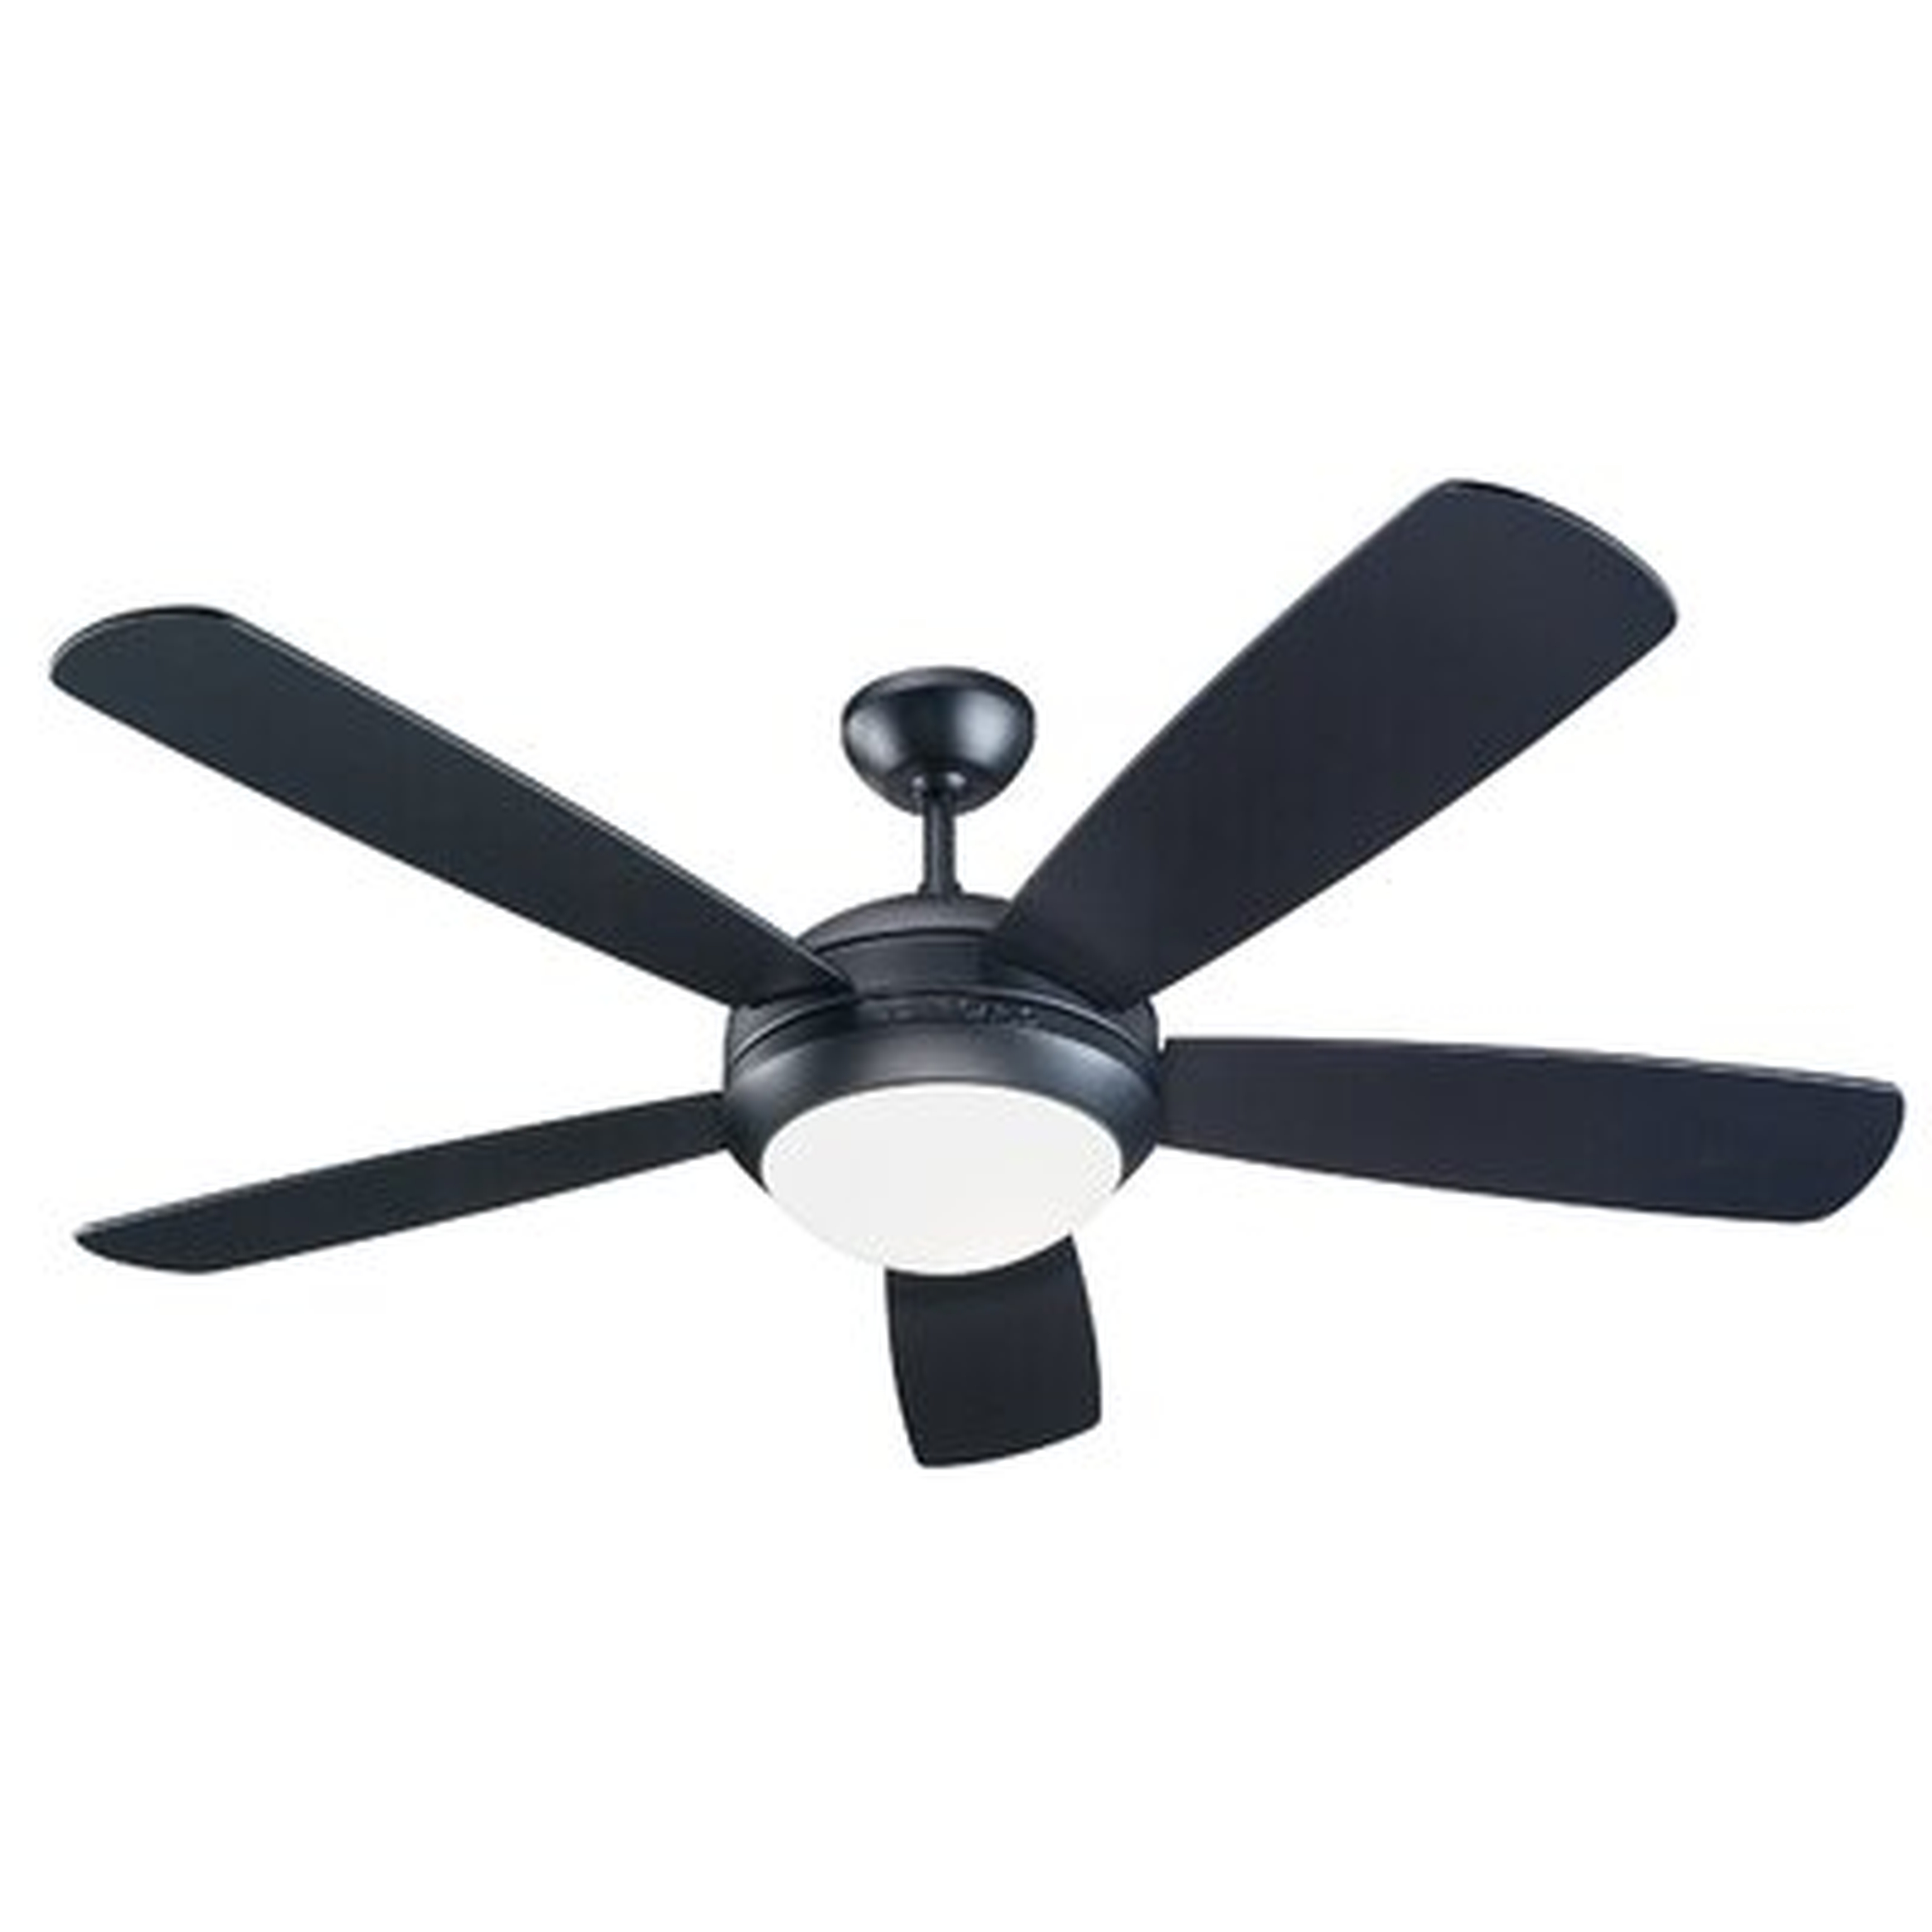 52" Calkins 5 Blade Ceiling Fan with Remote, Light Kit Included - Birch Lane